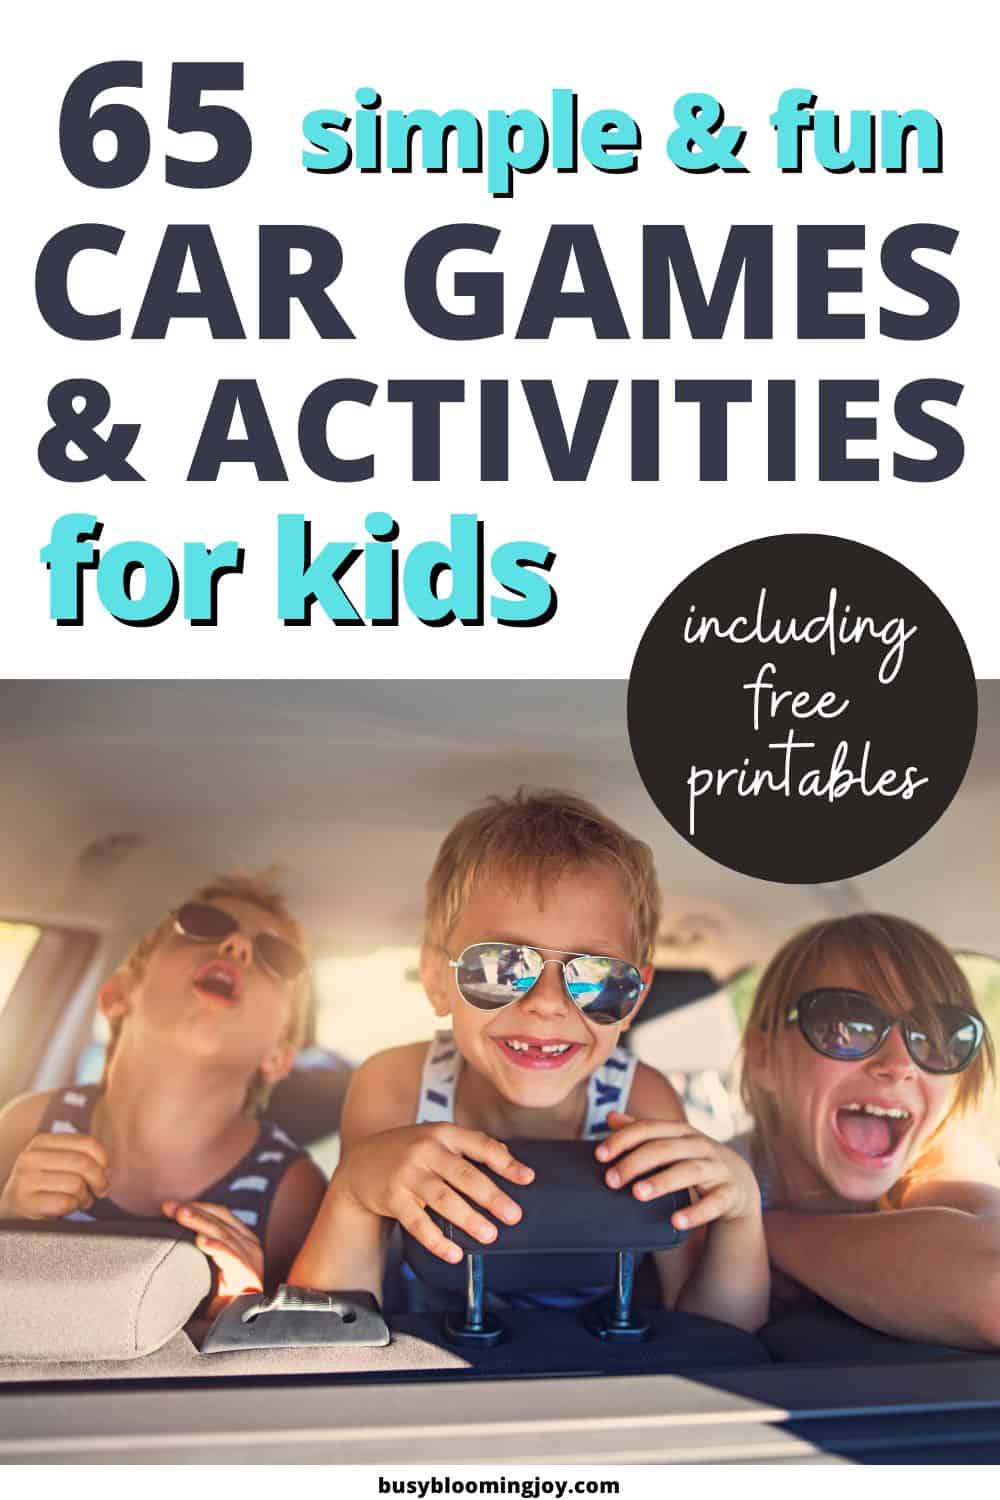 feature image + car activities for kids